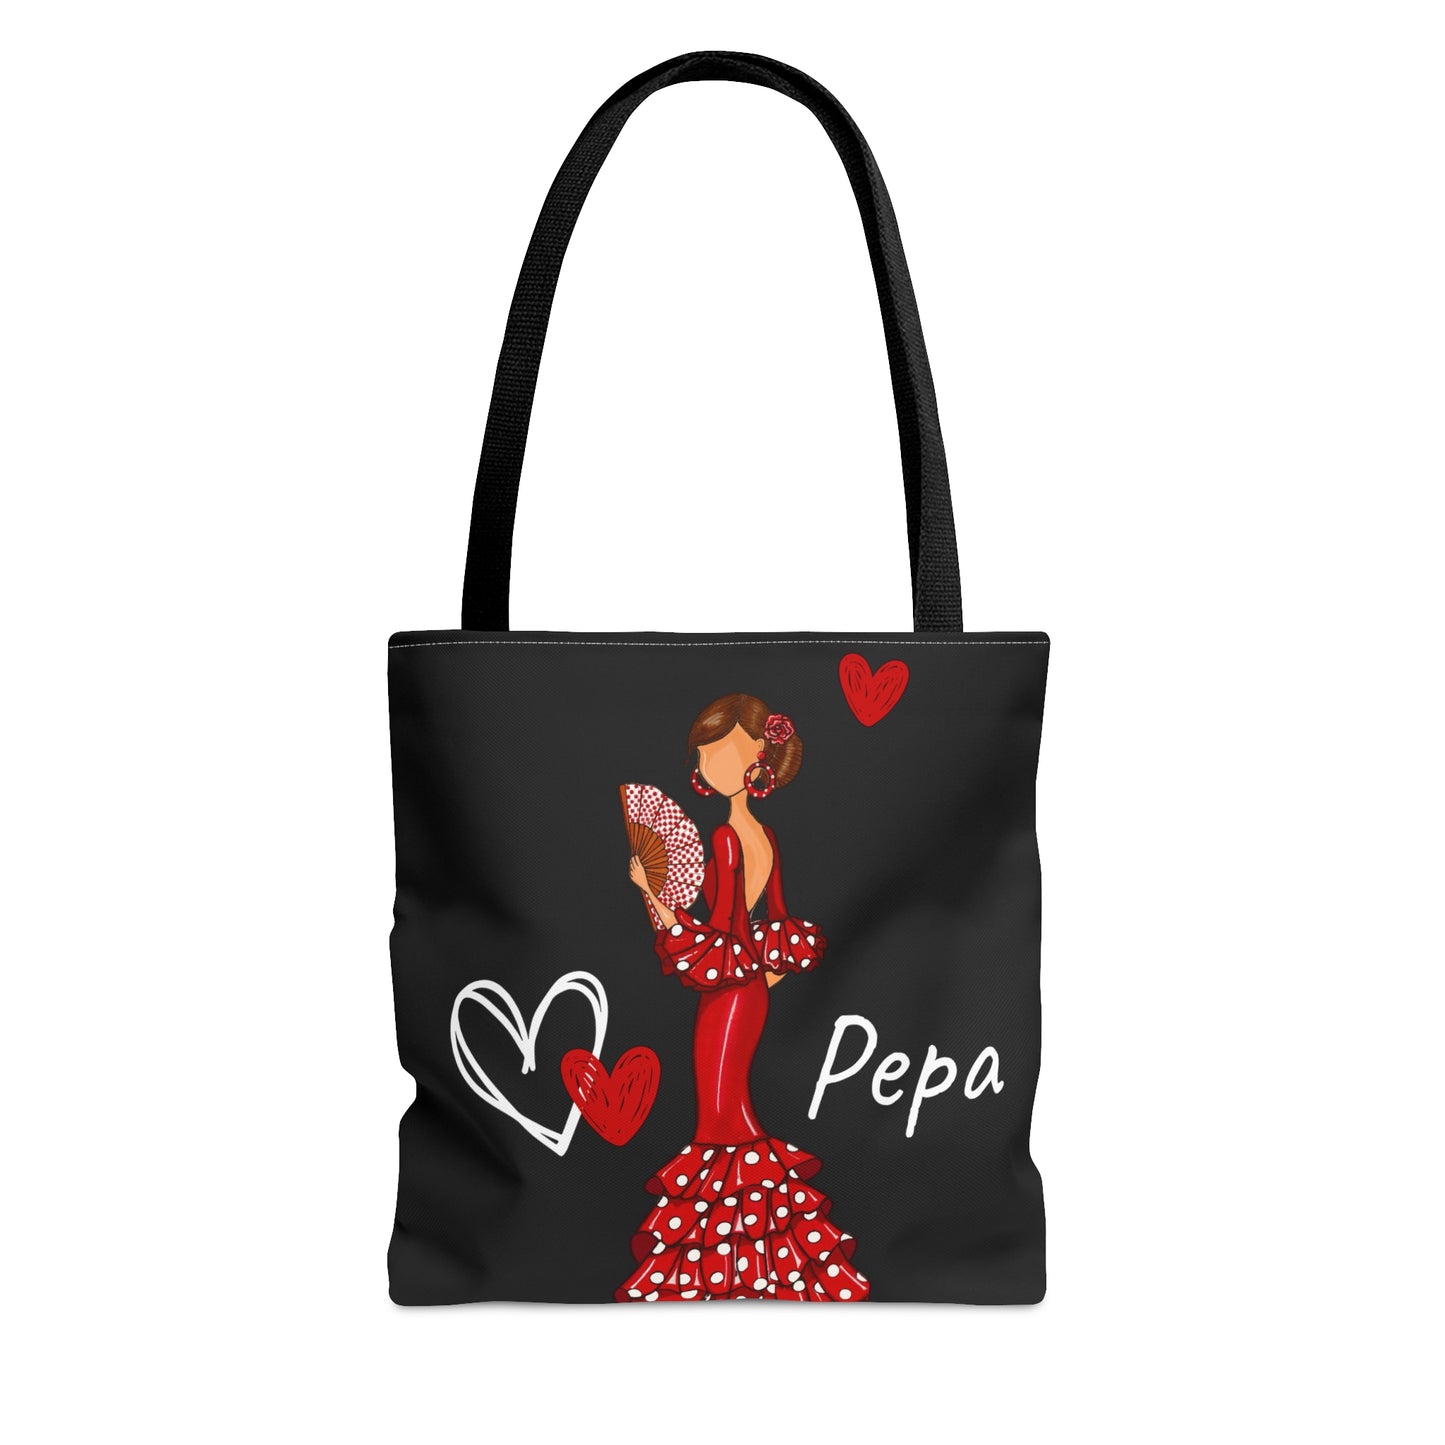 a black tote bag with a woman in a red dress